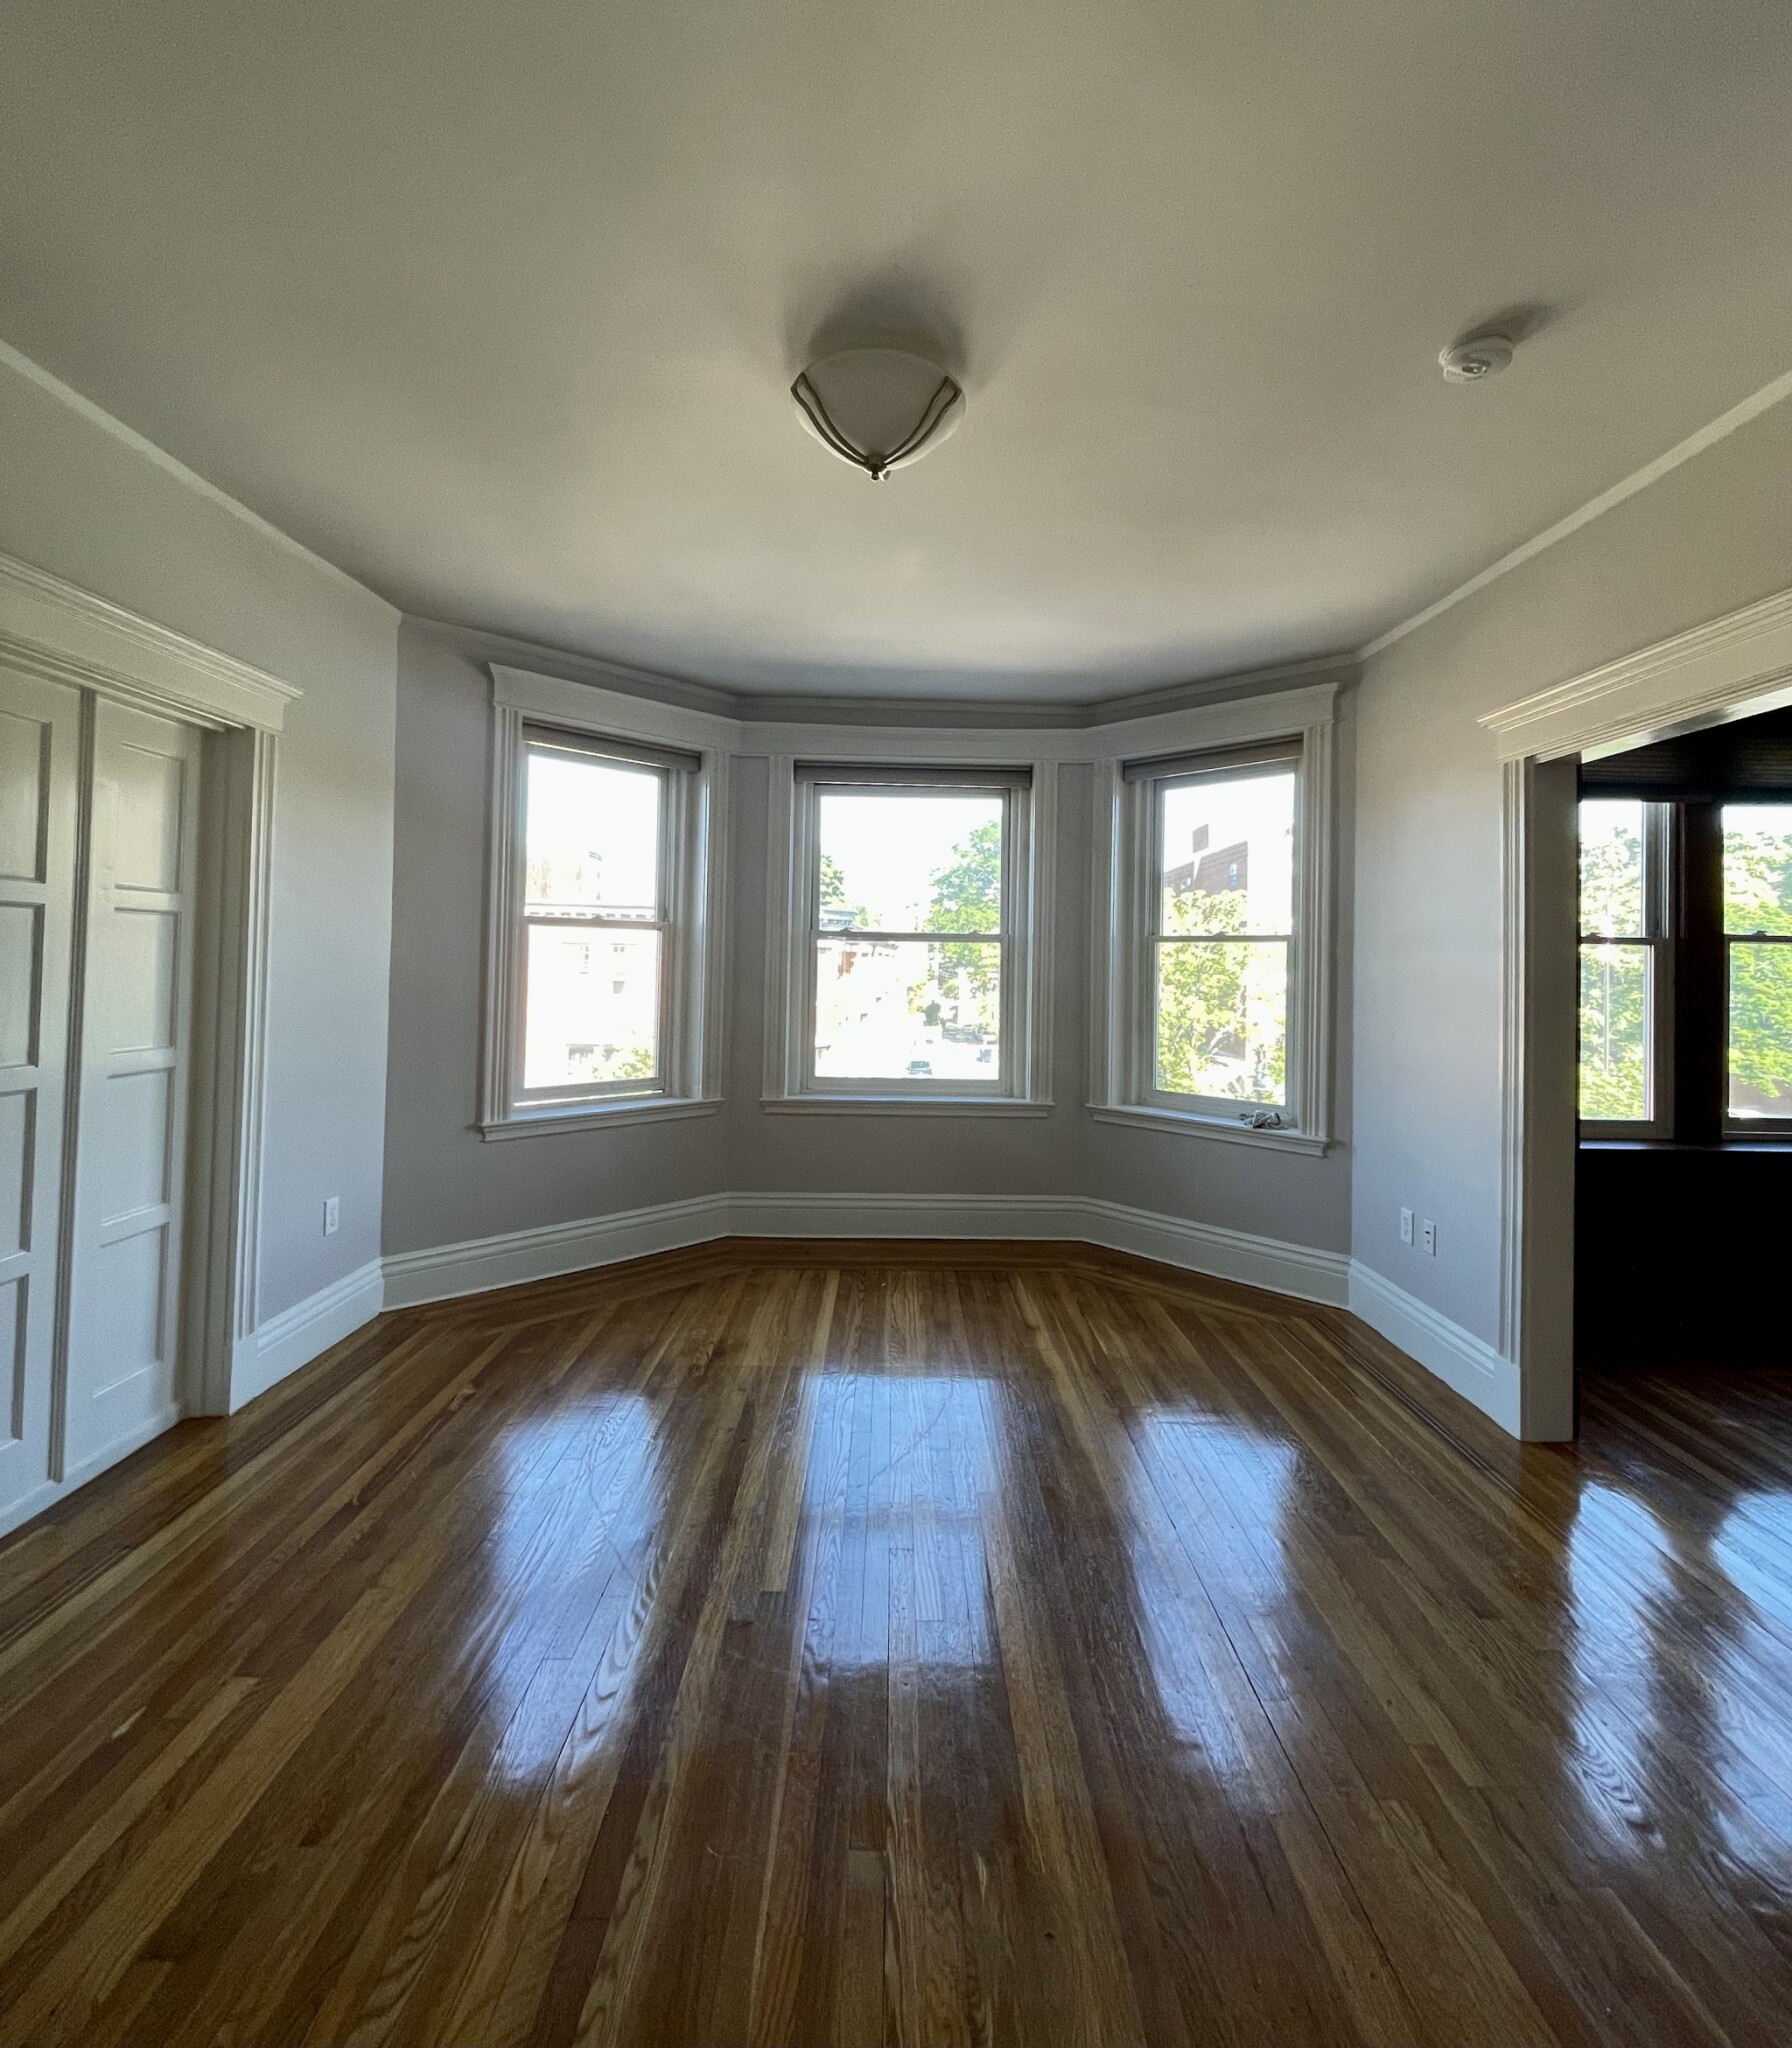 Photos of apartment on Dudley,Brookline MA 02446